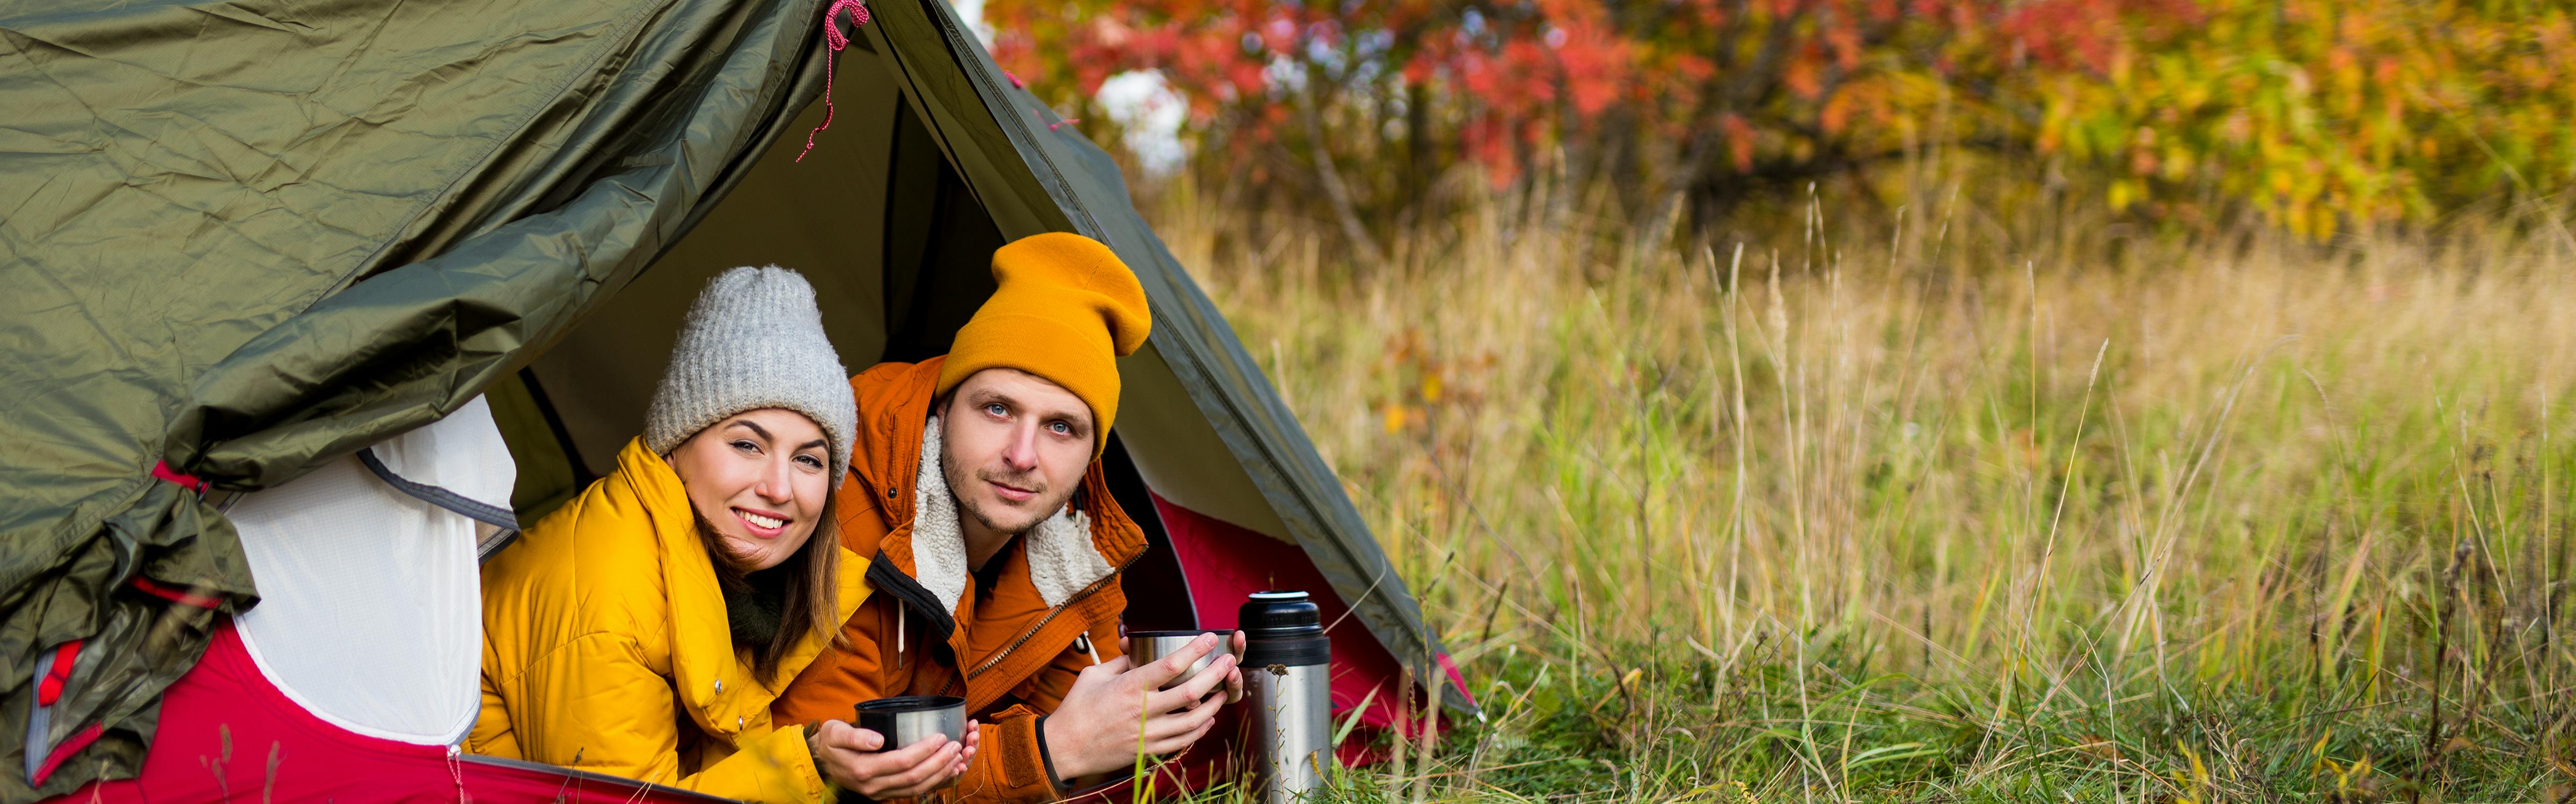 Winter Camping Clothes & Gear To Keep You Toasty